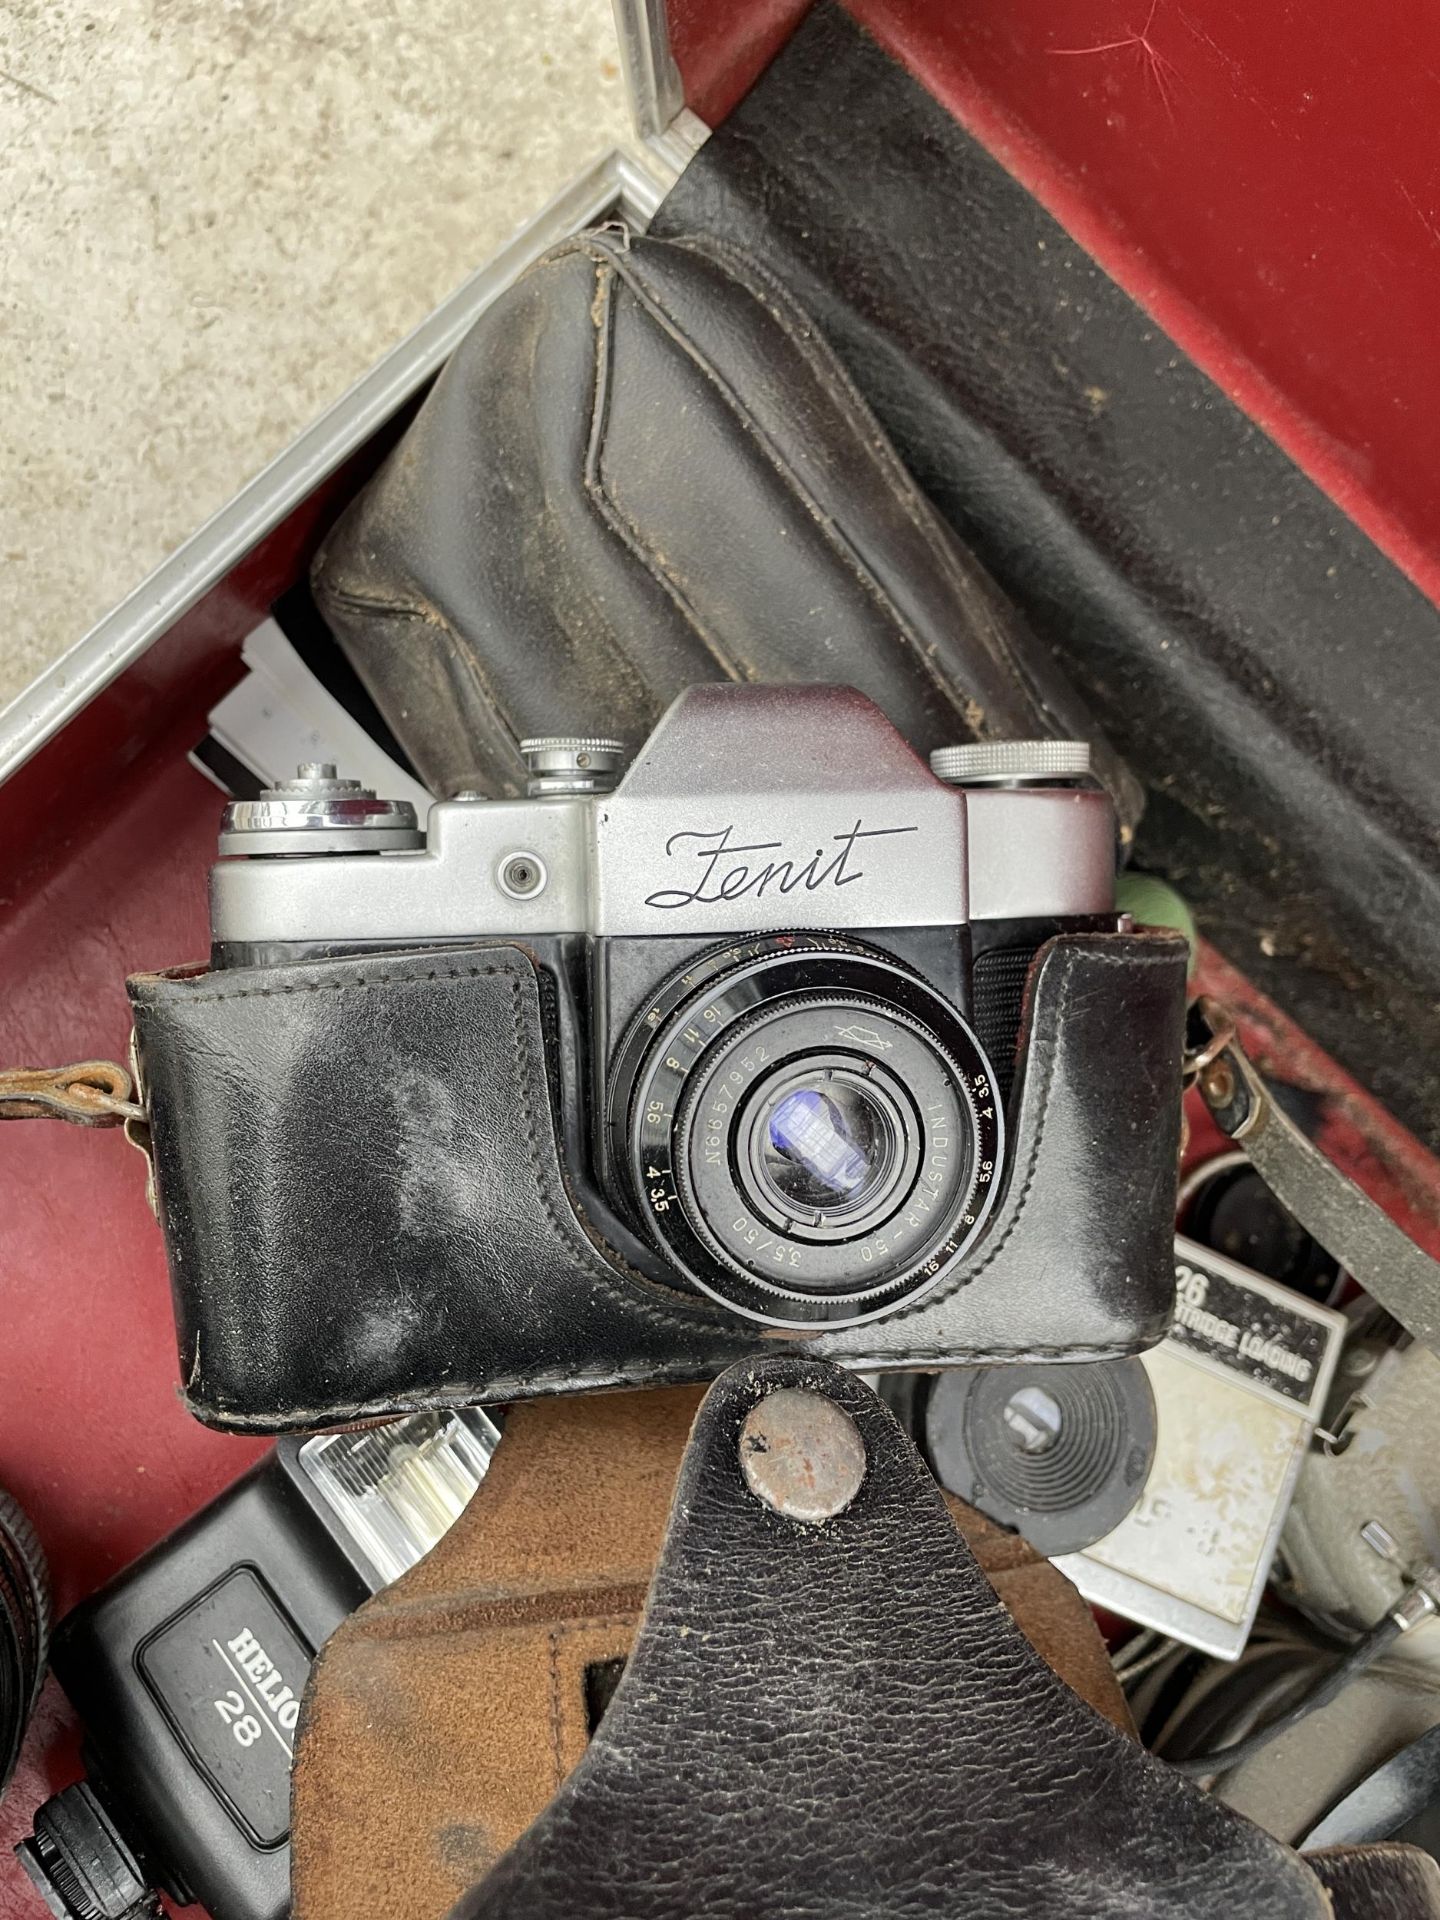 AN ASSORTMENT OF VINTAGE PHOTOGRAPHY EQUIPMENT TO INCLUDE A ZENIT CAMERA, KODAK CAMERA, LENS AND A - Image 2 of 4